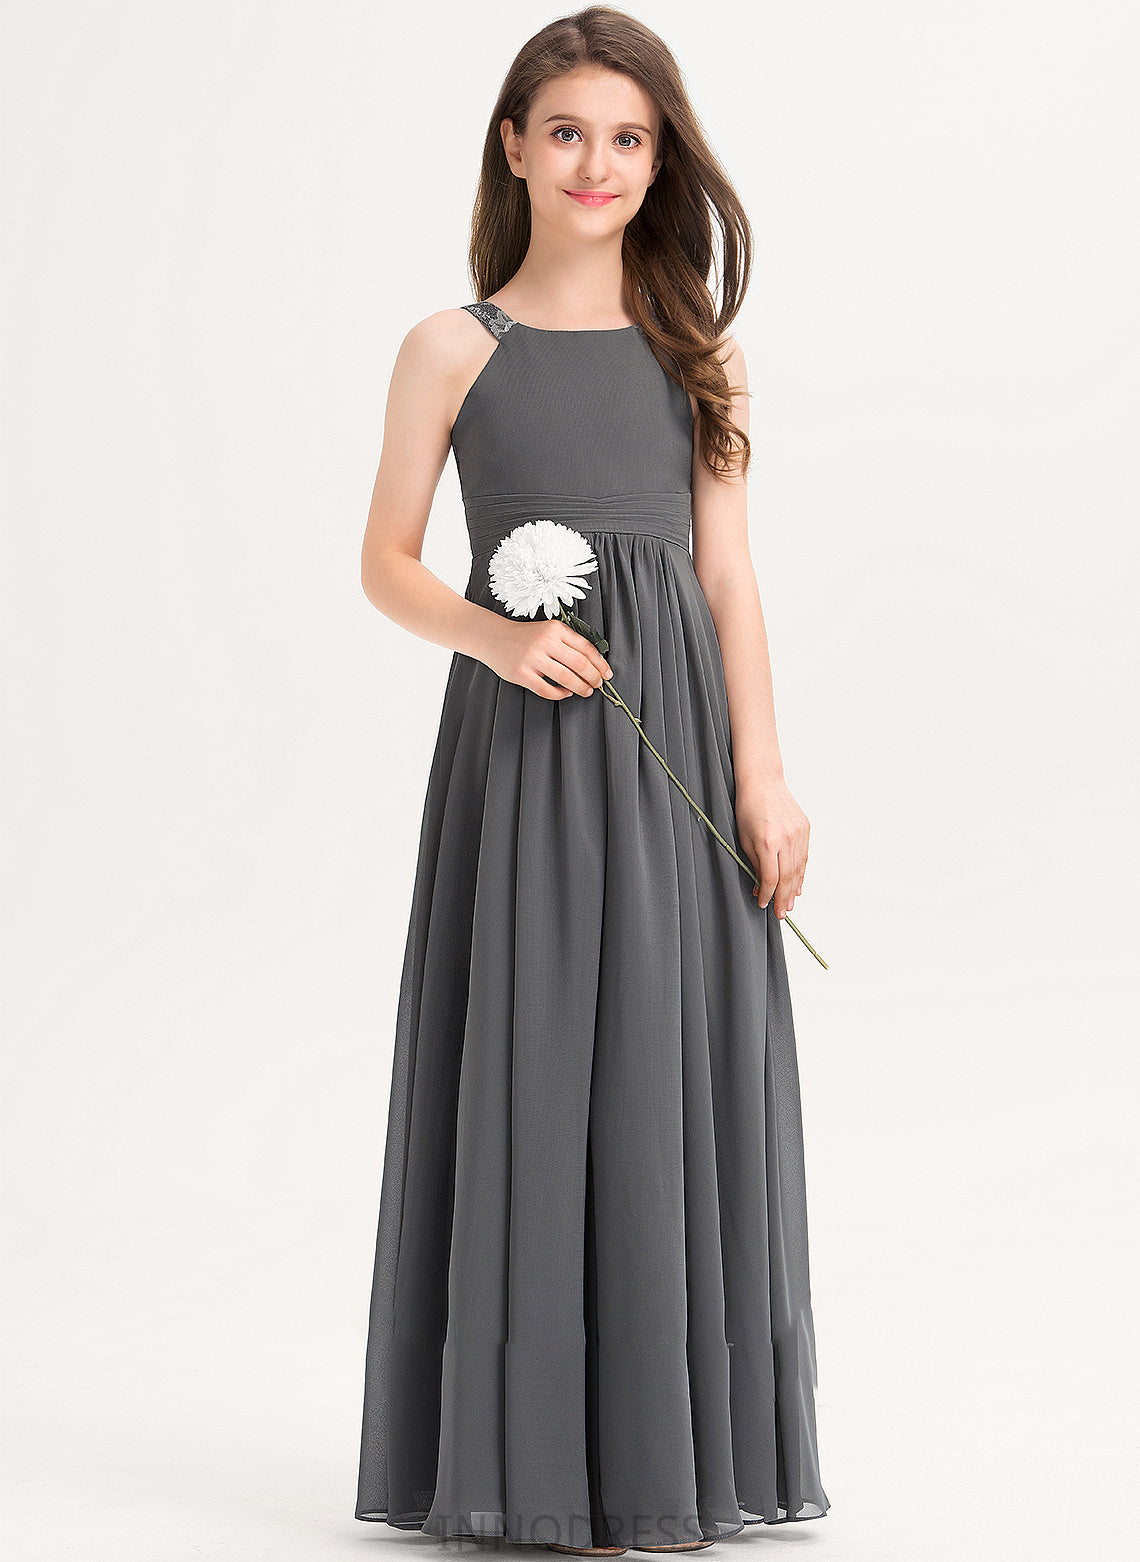 Junior Bridesmaid Dresses Makaila Chiffon Scoop With Neck Floor-Length Lace A-Line Ruffle